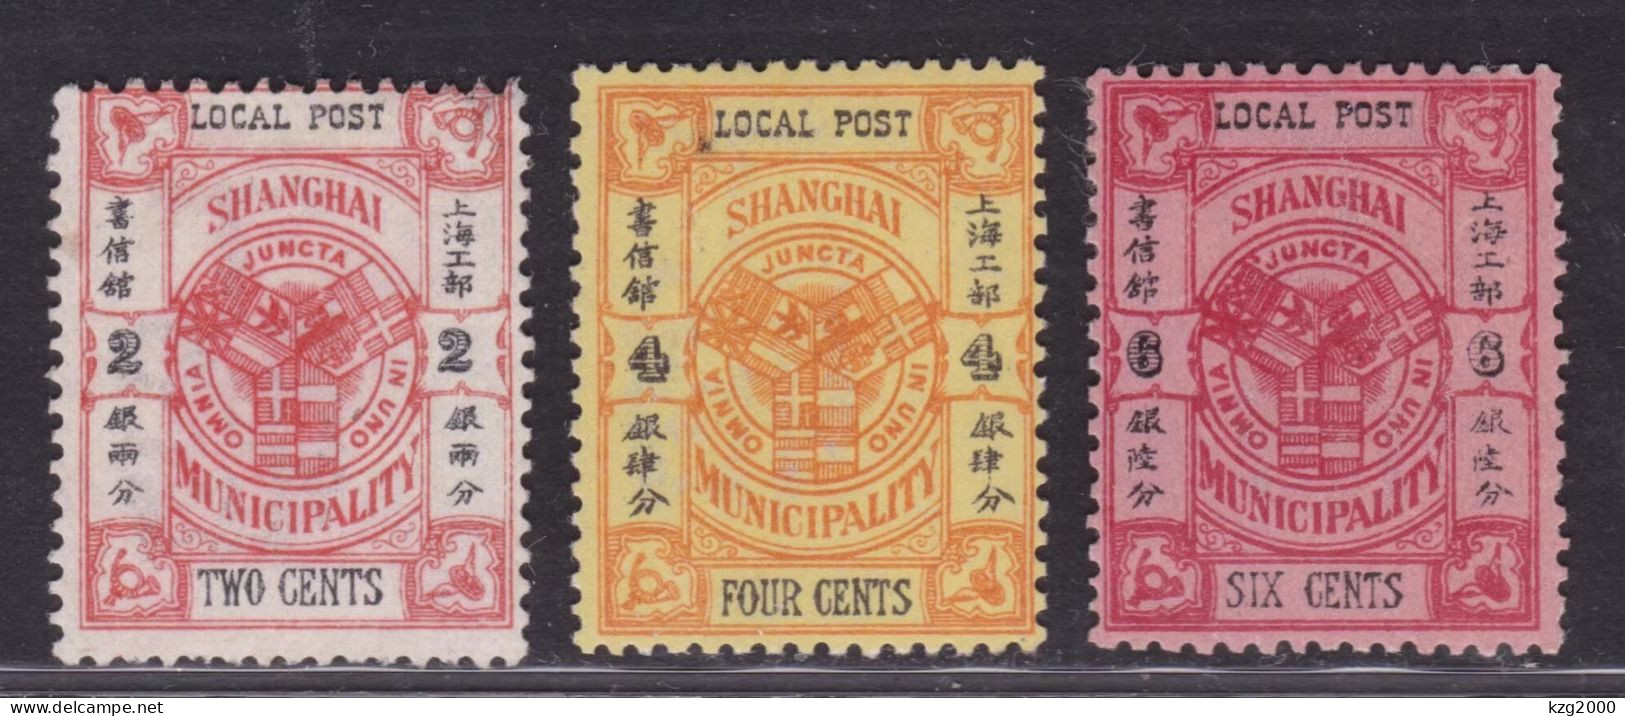 China  Qing Dynasty Stamp 1896 SH.30  2nd Print Shanghai Municipal Council Mark Issue 3 Stamps - Ongebruikt